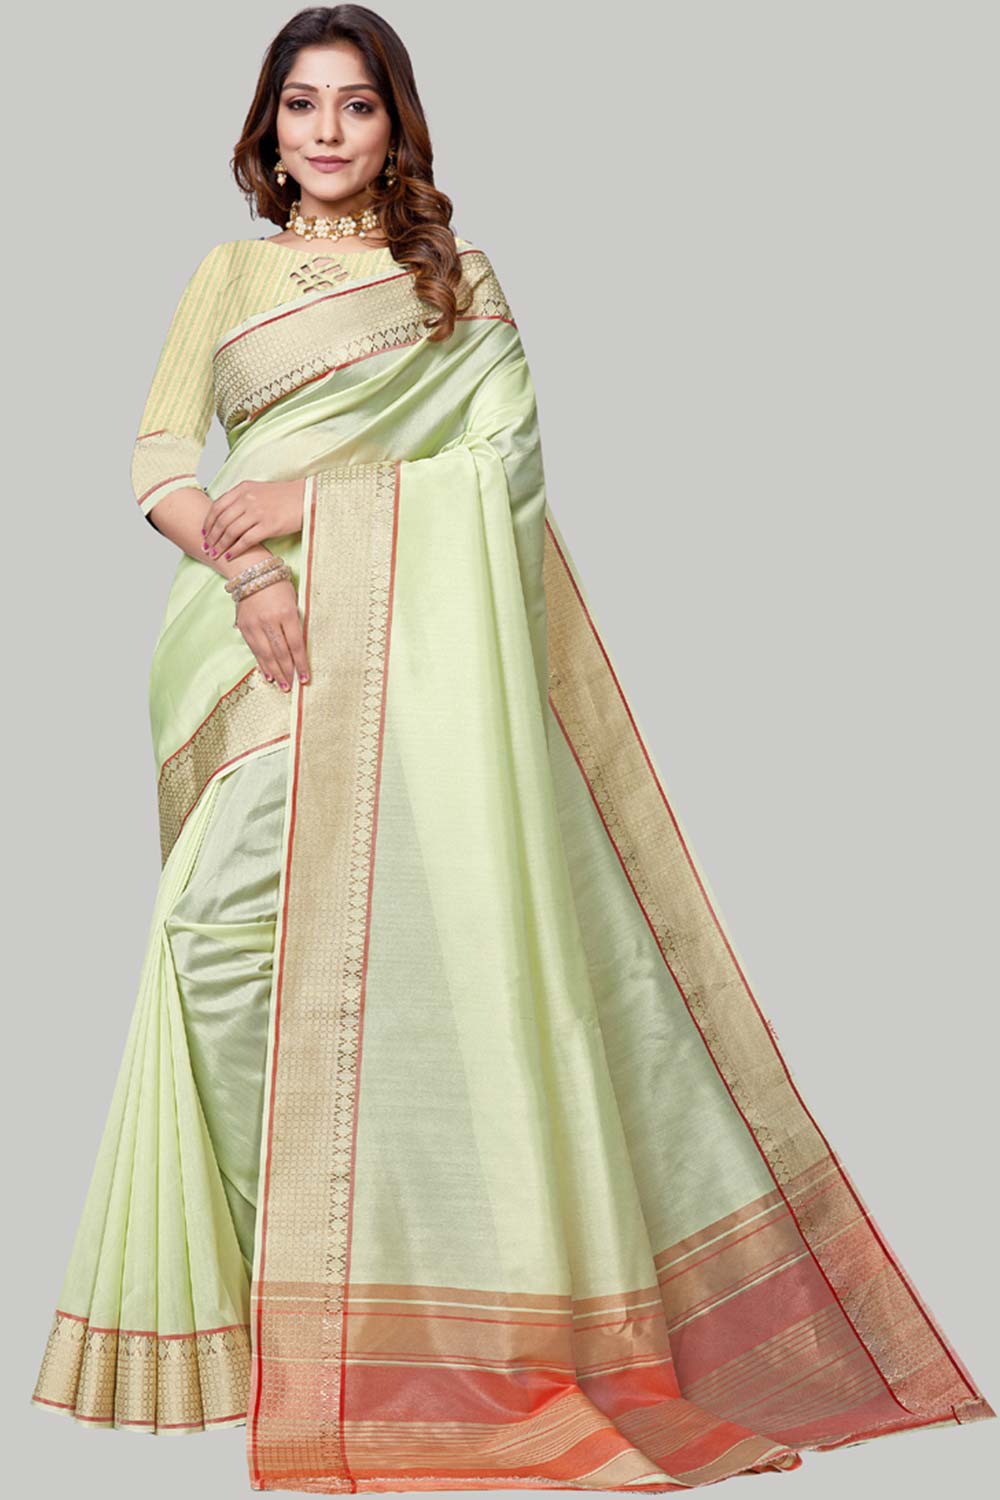 Buy Jute Cotton Woven Border Solid Saree in Lime Green Online